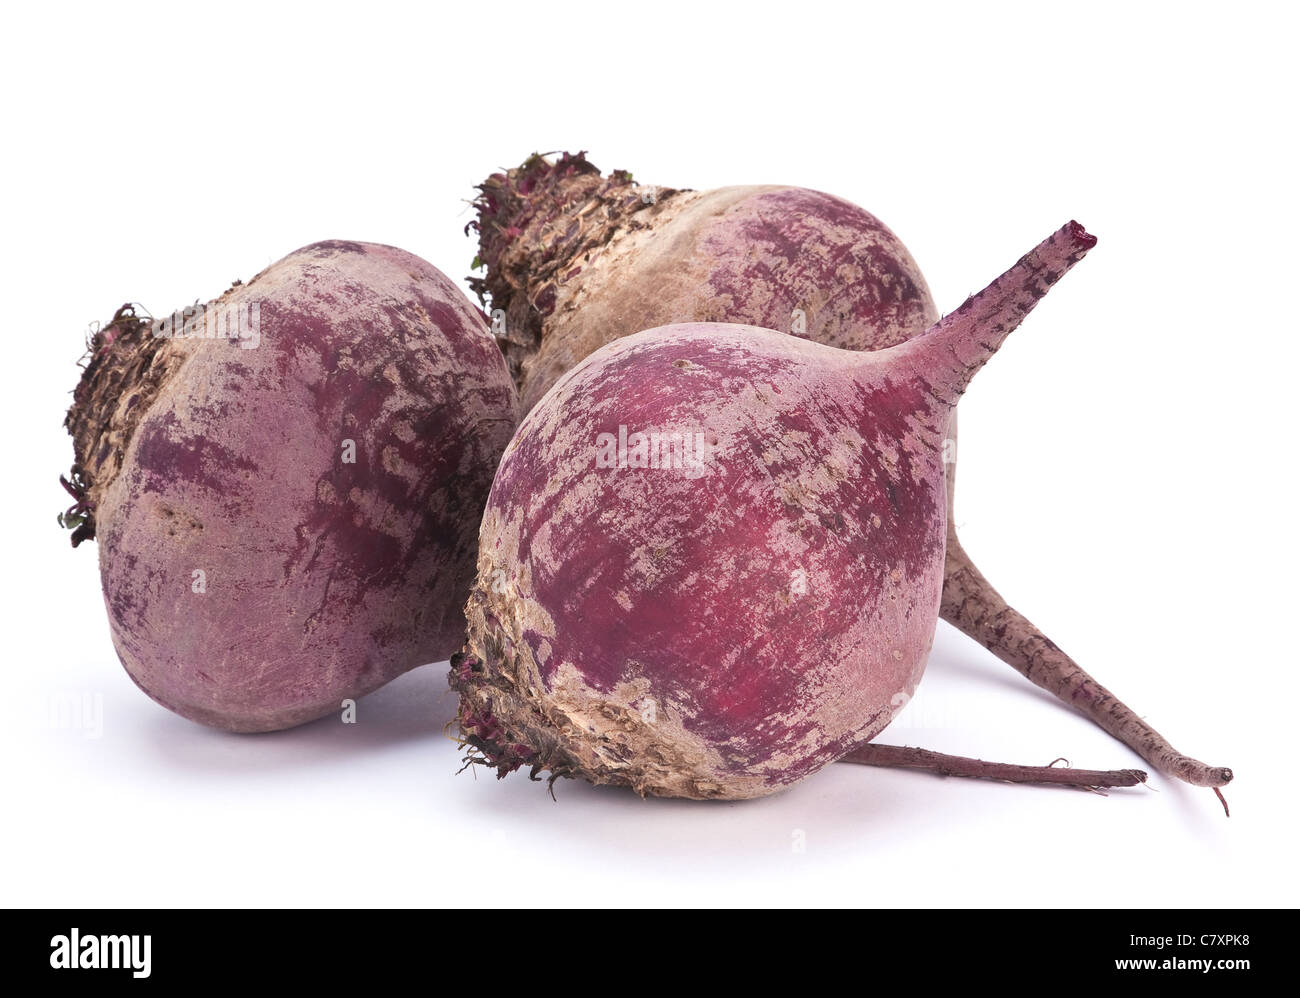 Ripe bet root vegetable isolated on white Stock Photo